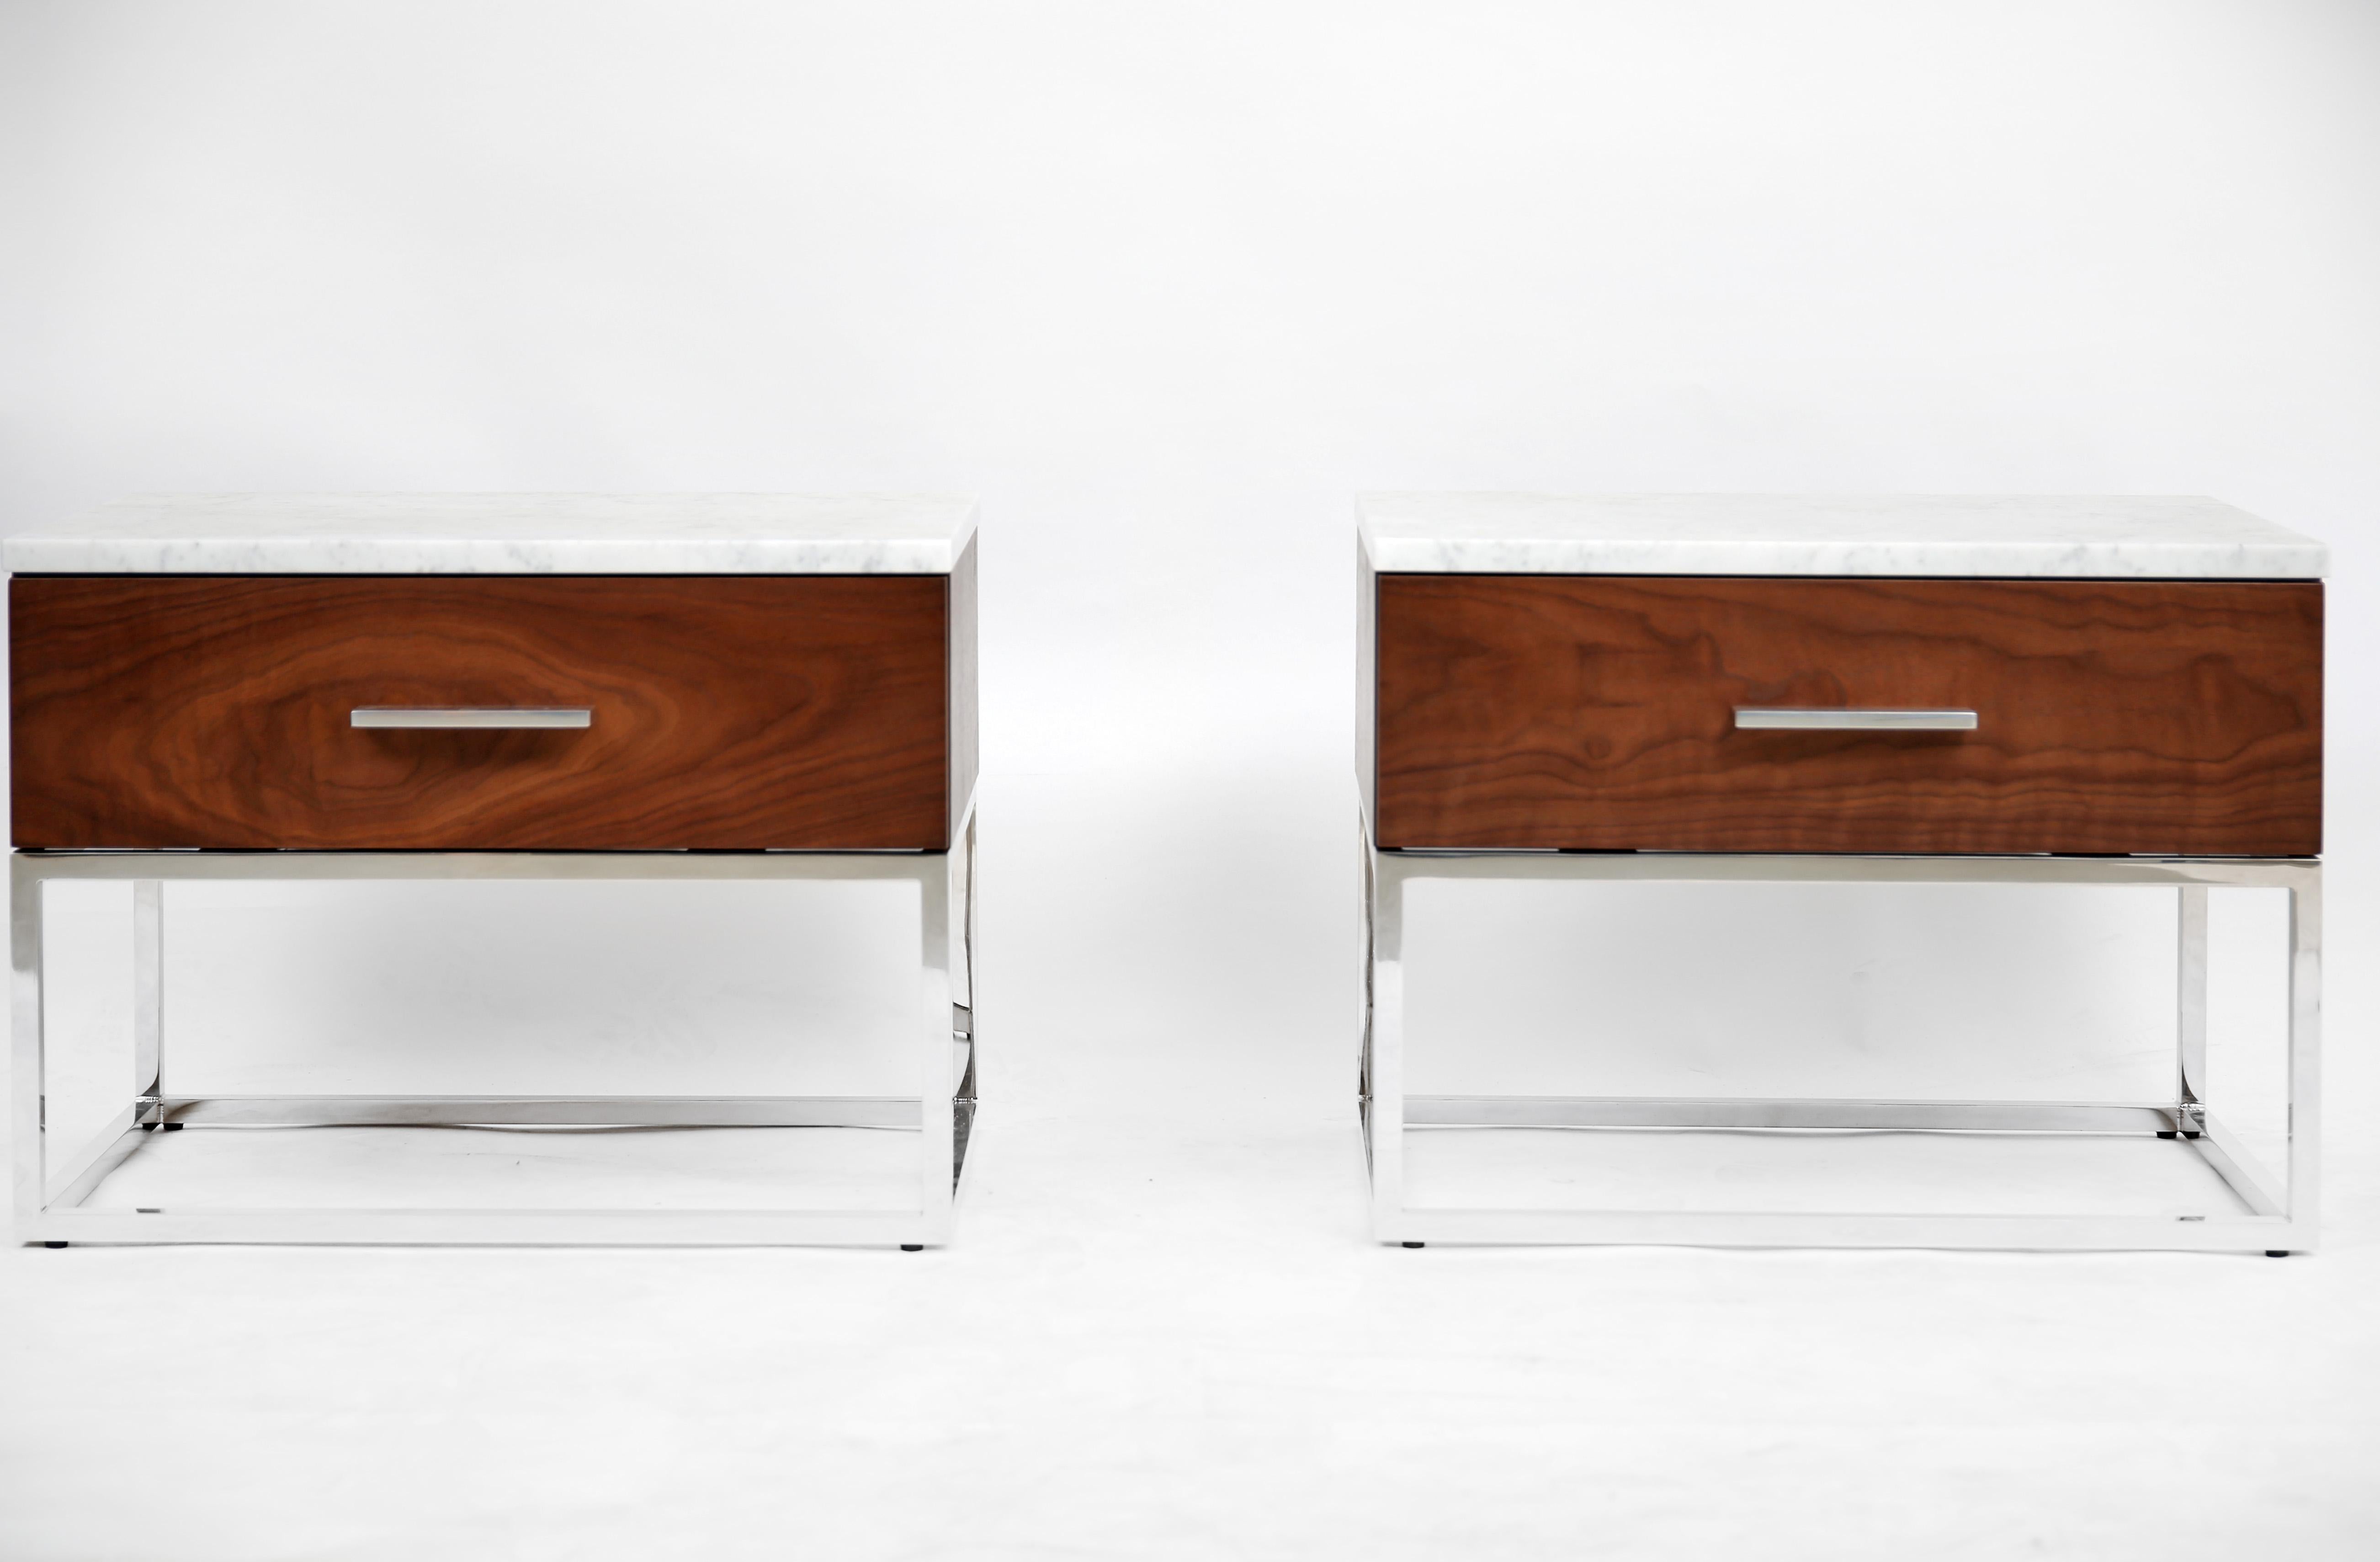 Hand-Crafted Mid-Century Modern Akureyri Bedside Table in Walnut, Stainless Steel and Marble For Sale